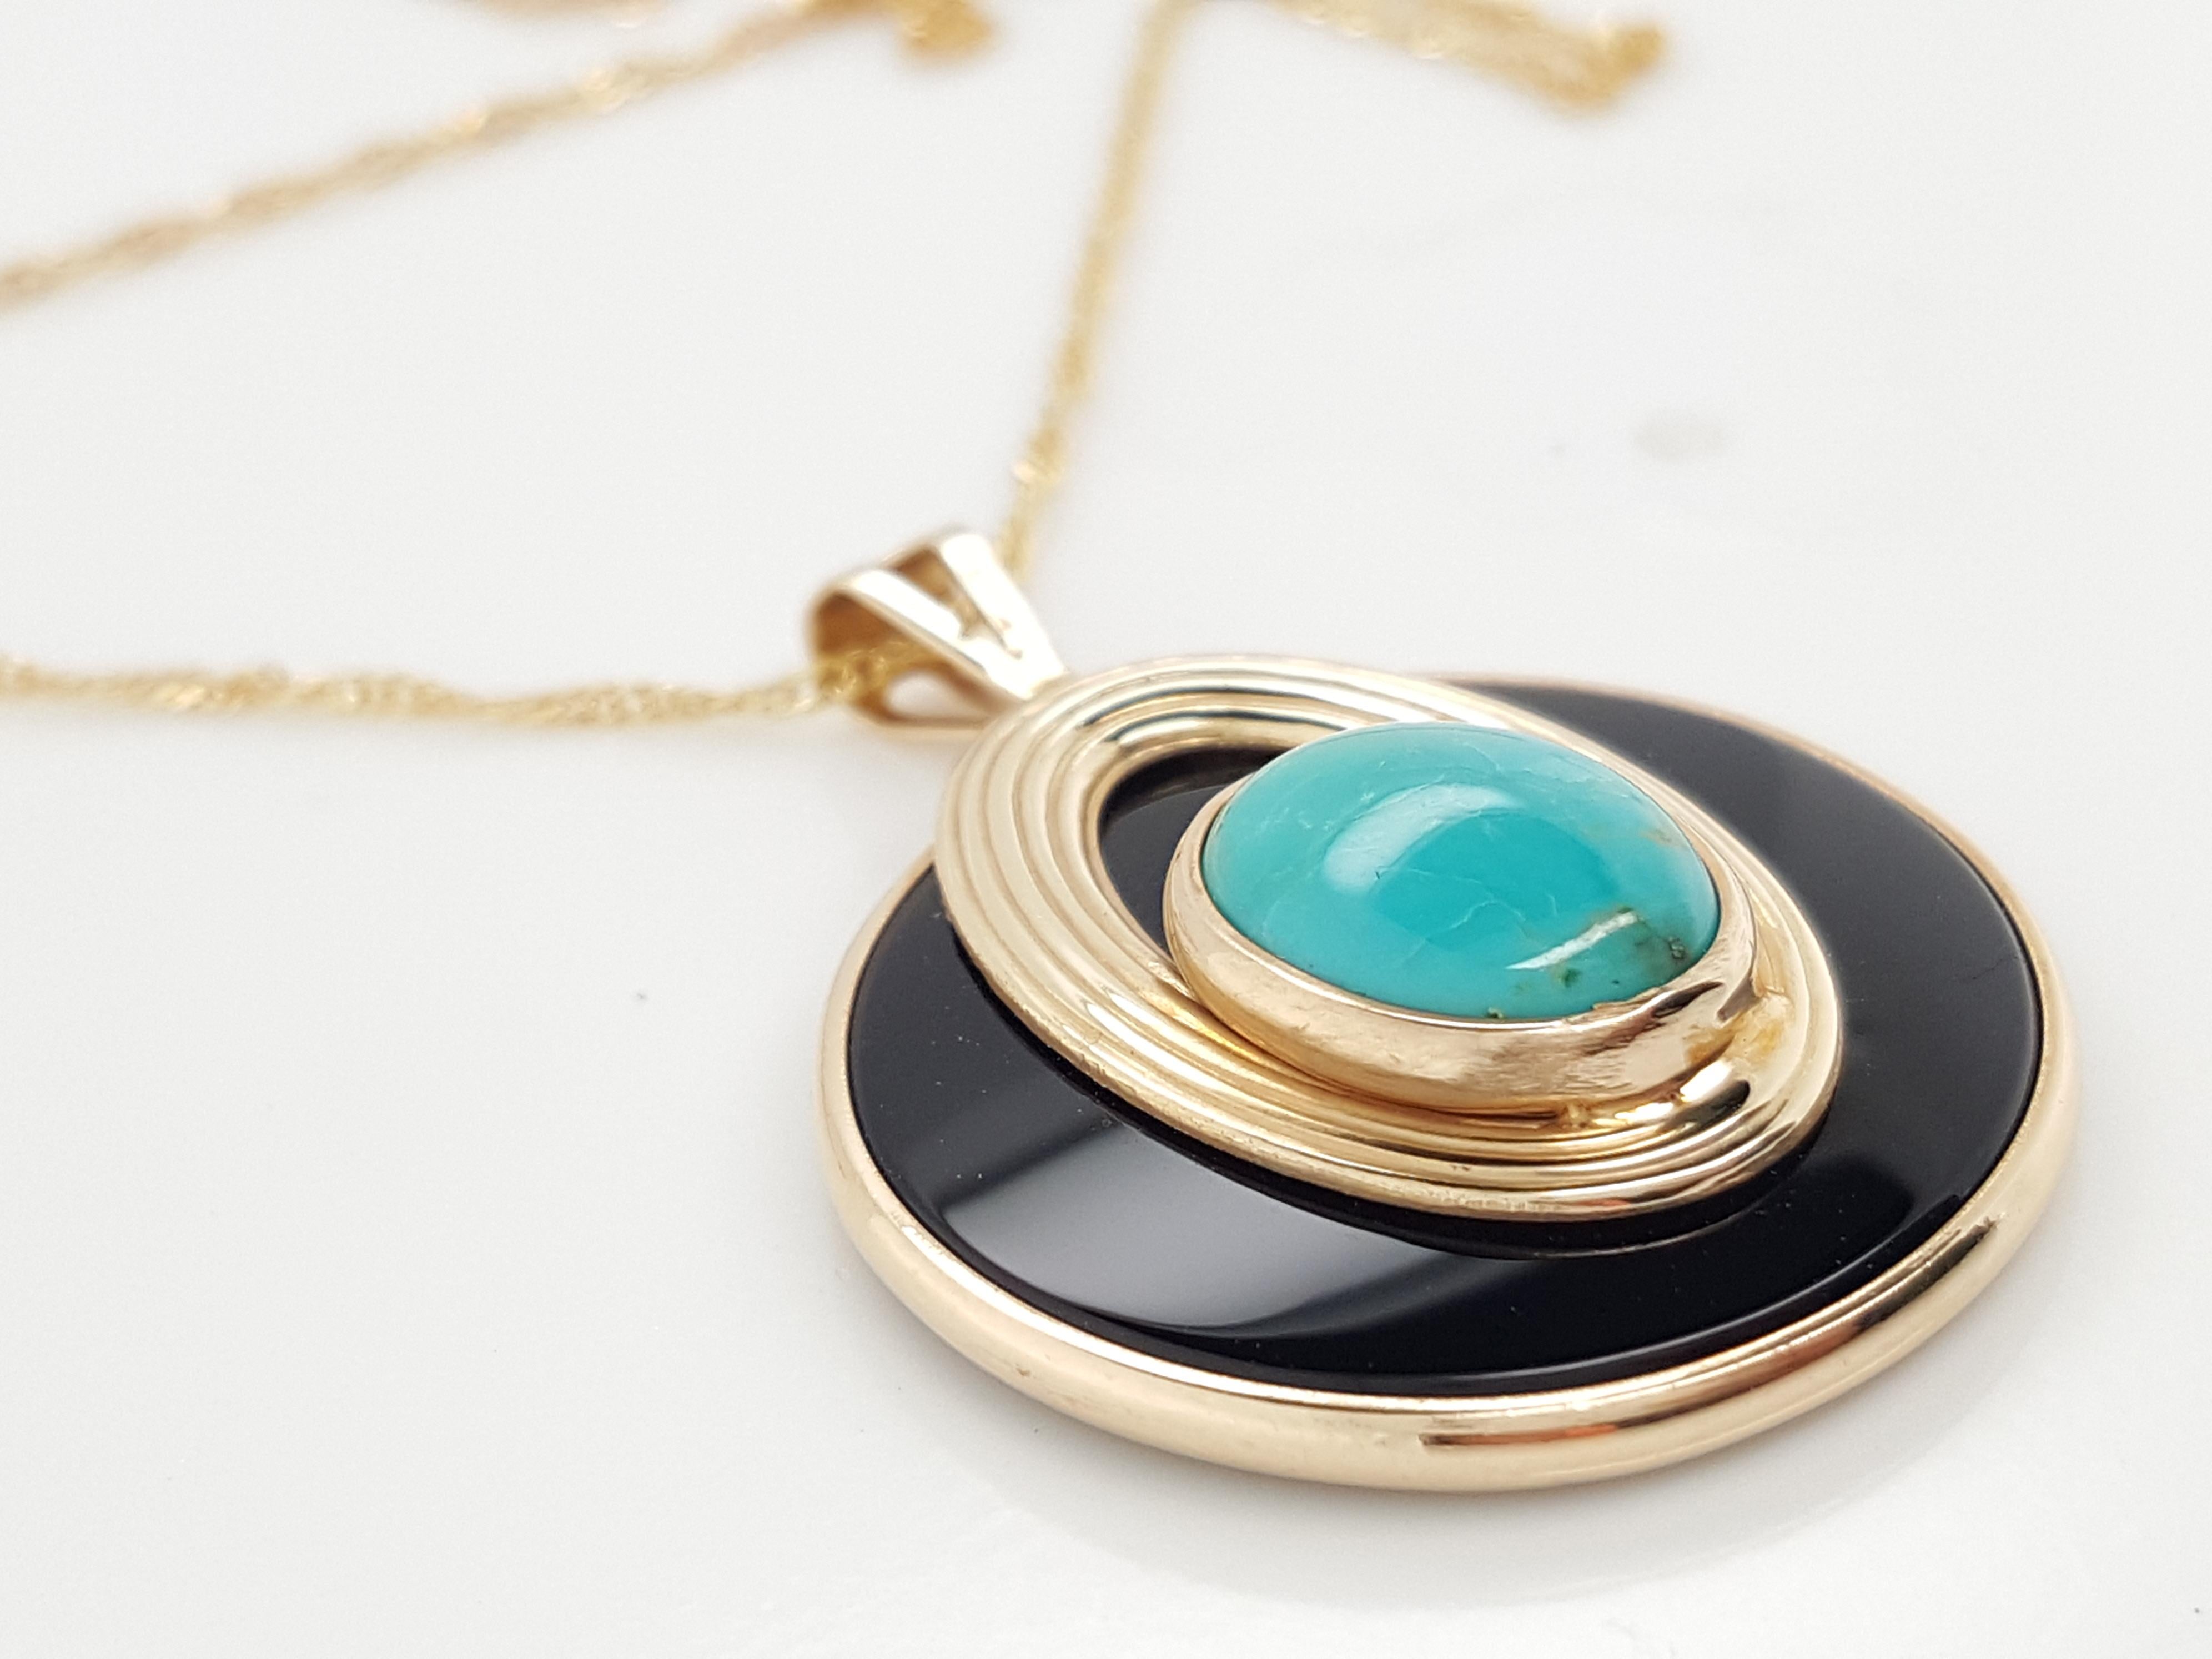 14 Karat Yellow Gold Estate Onyx Disk Topped with Howlite Pendant and Chain For Sale 2